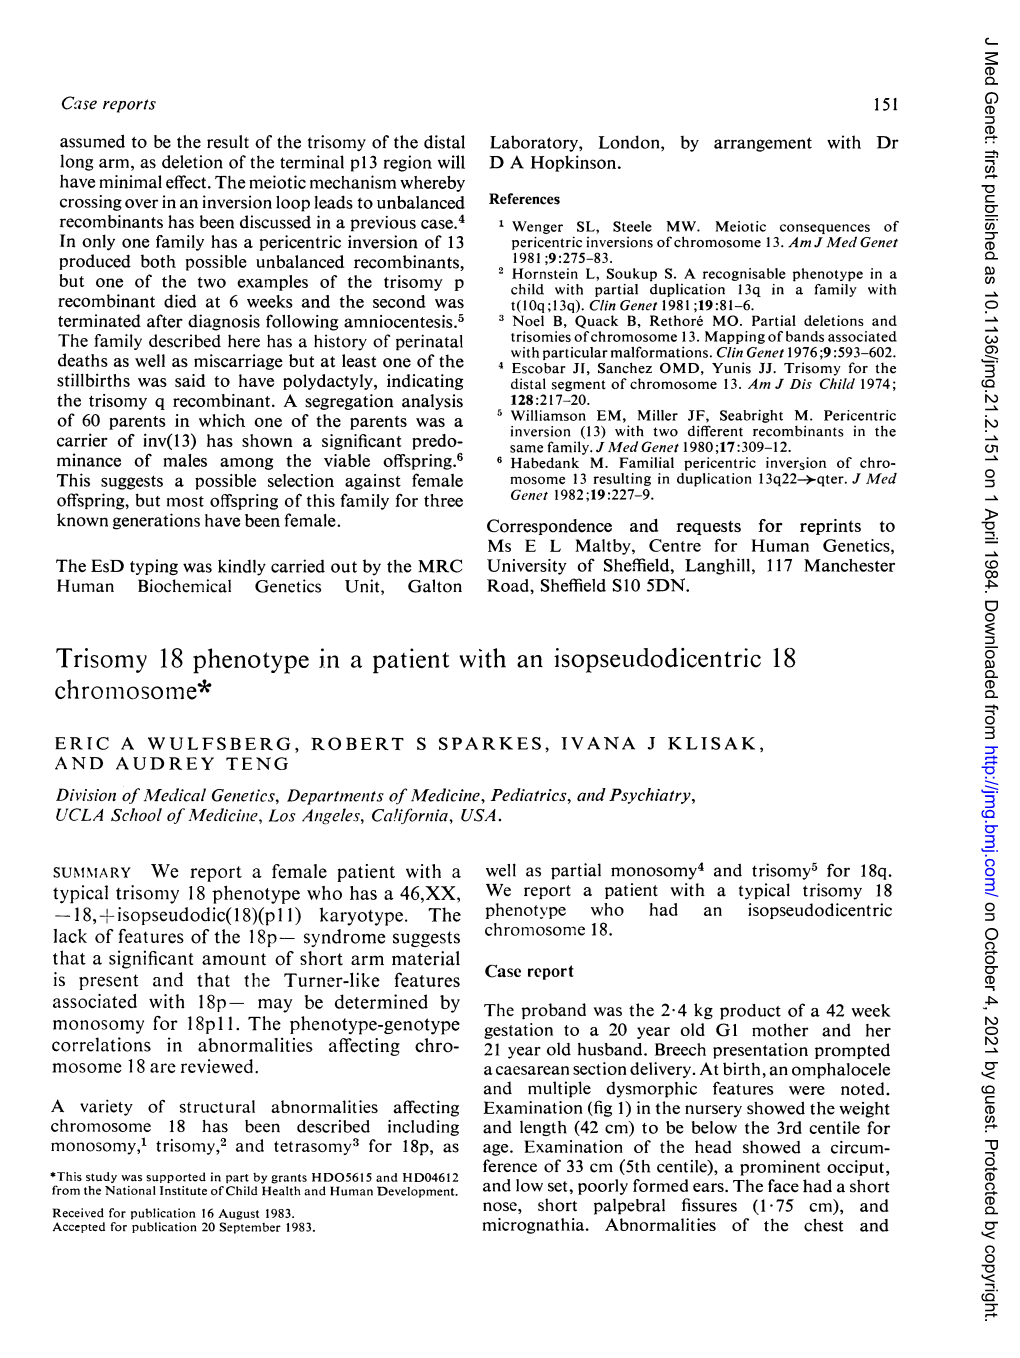 Trisomy 18 Phenotype in a Patient with an Isopseudodicentric 18 Chromosorne*